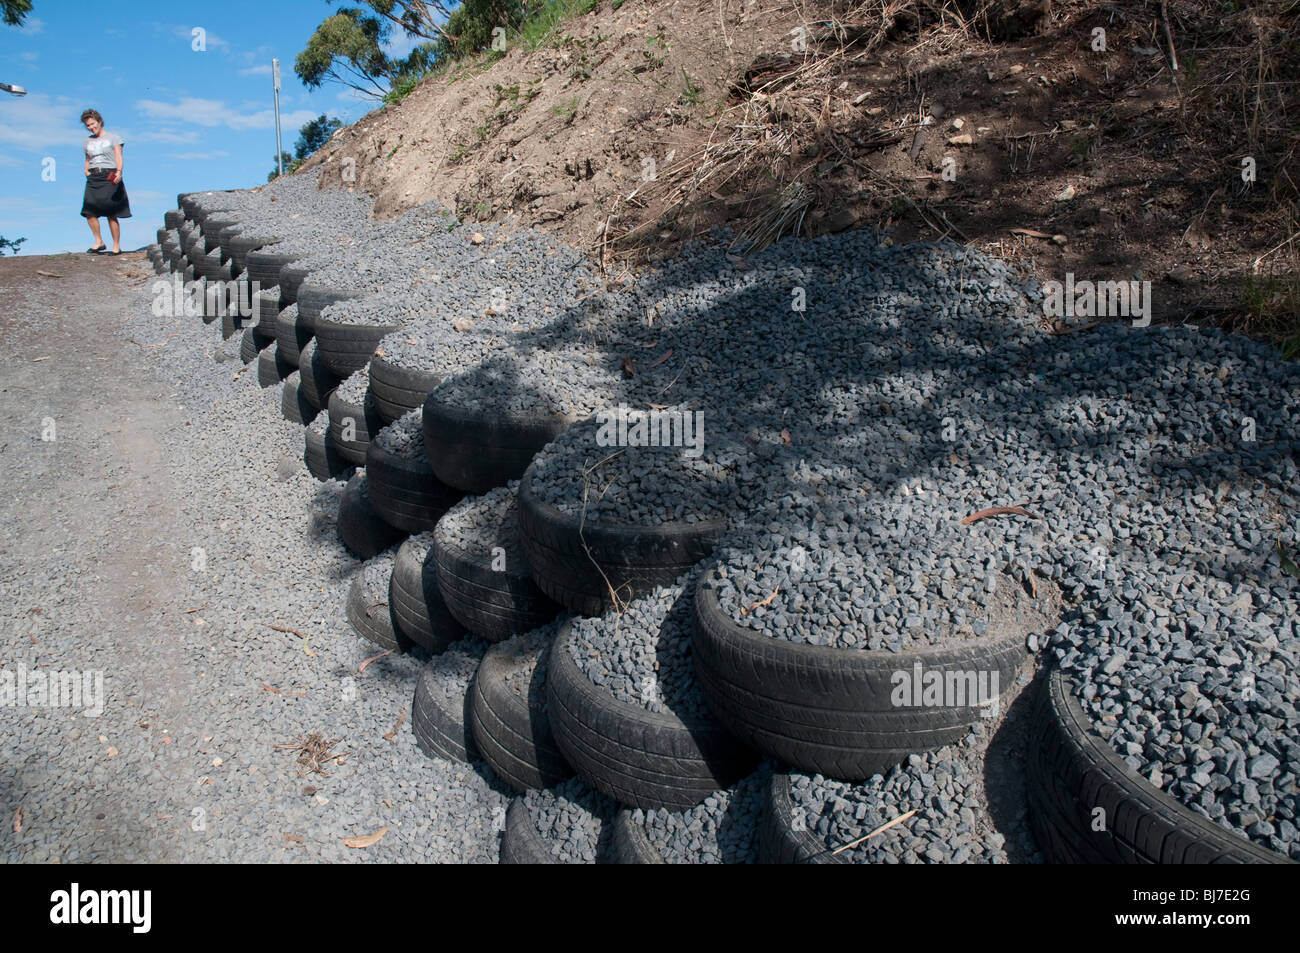 Recycled tyres and gravel used as a retaining wall on a driveway Stock Photo